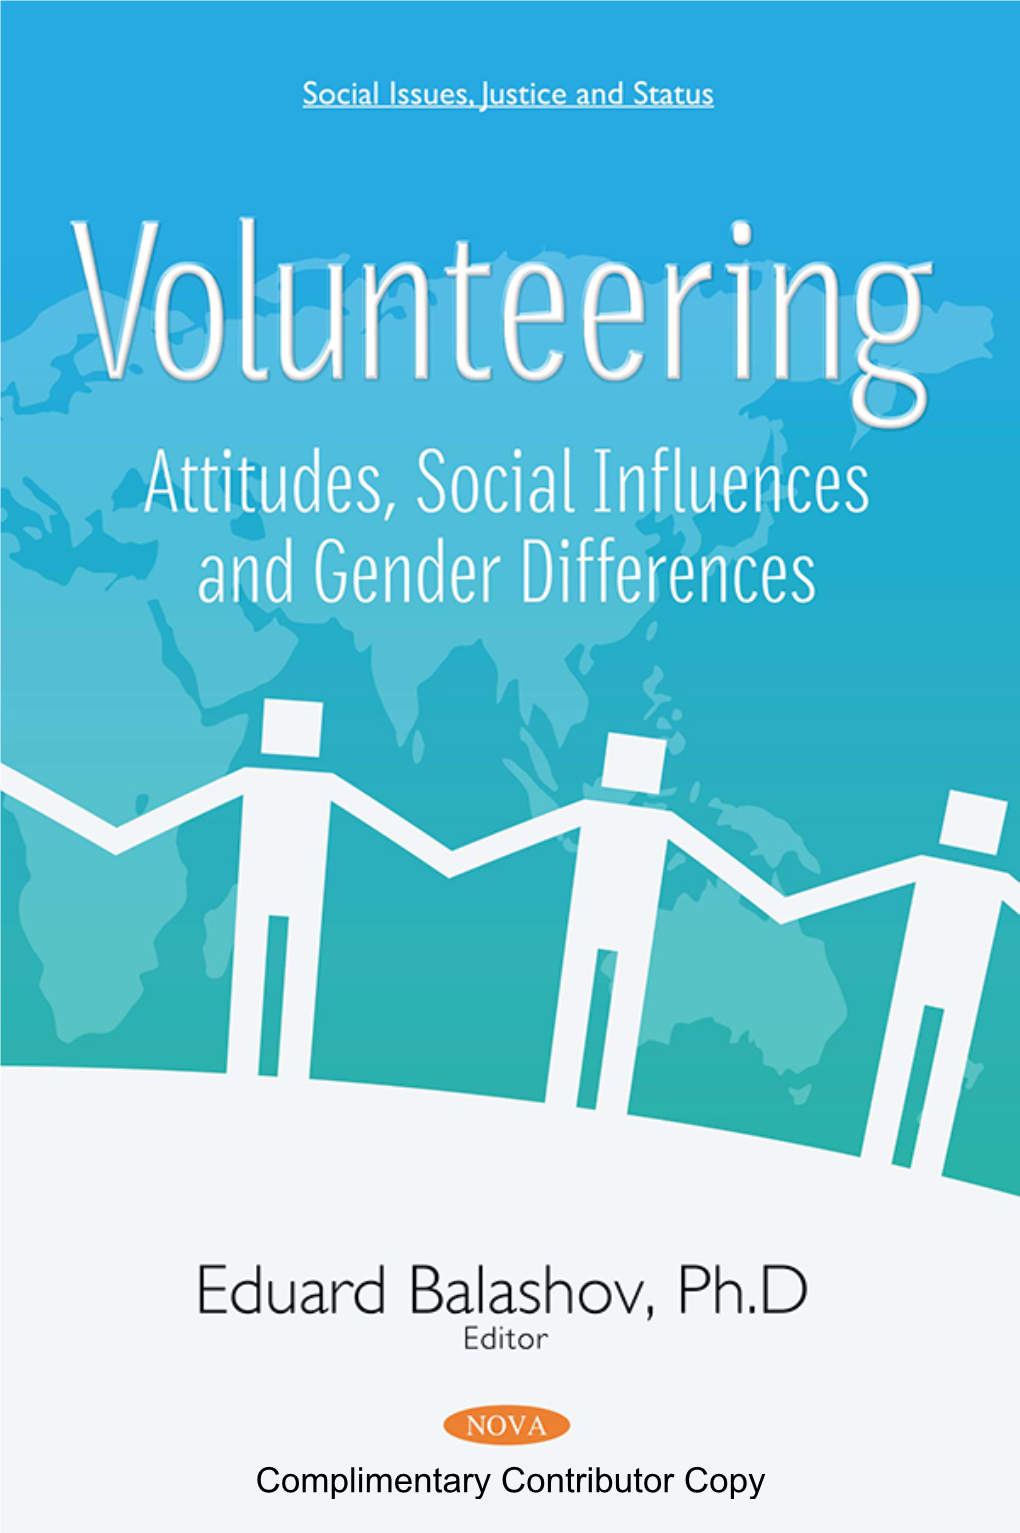 Volunteering Attitudes, Social Influences and Gender Differences